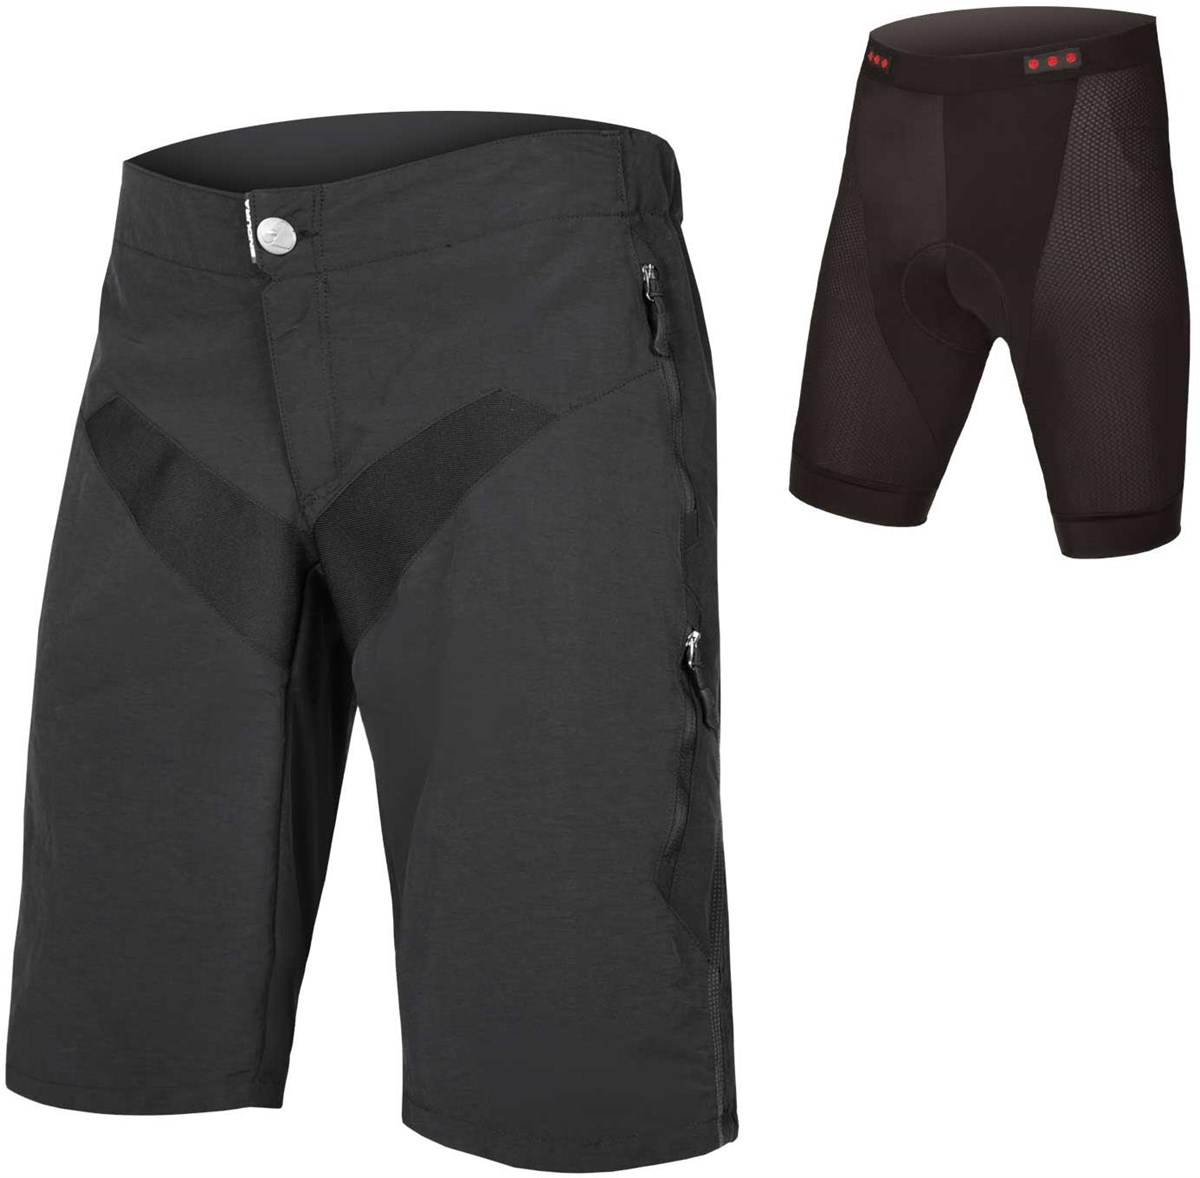 Endura SingleTrack Short with Liner product image